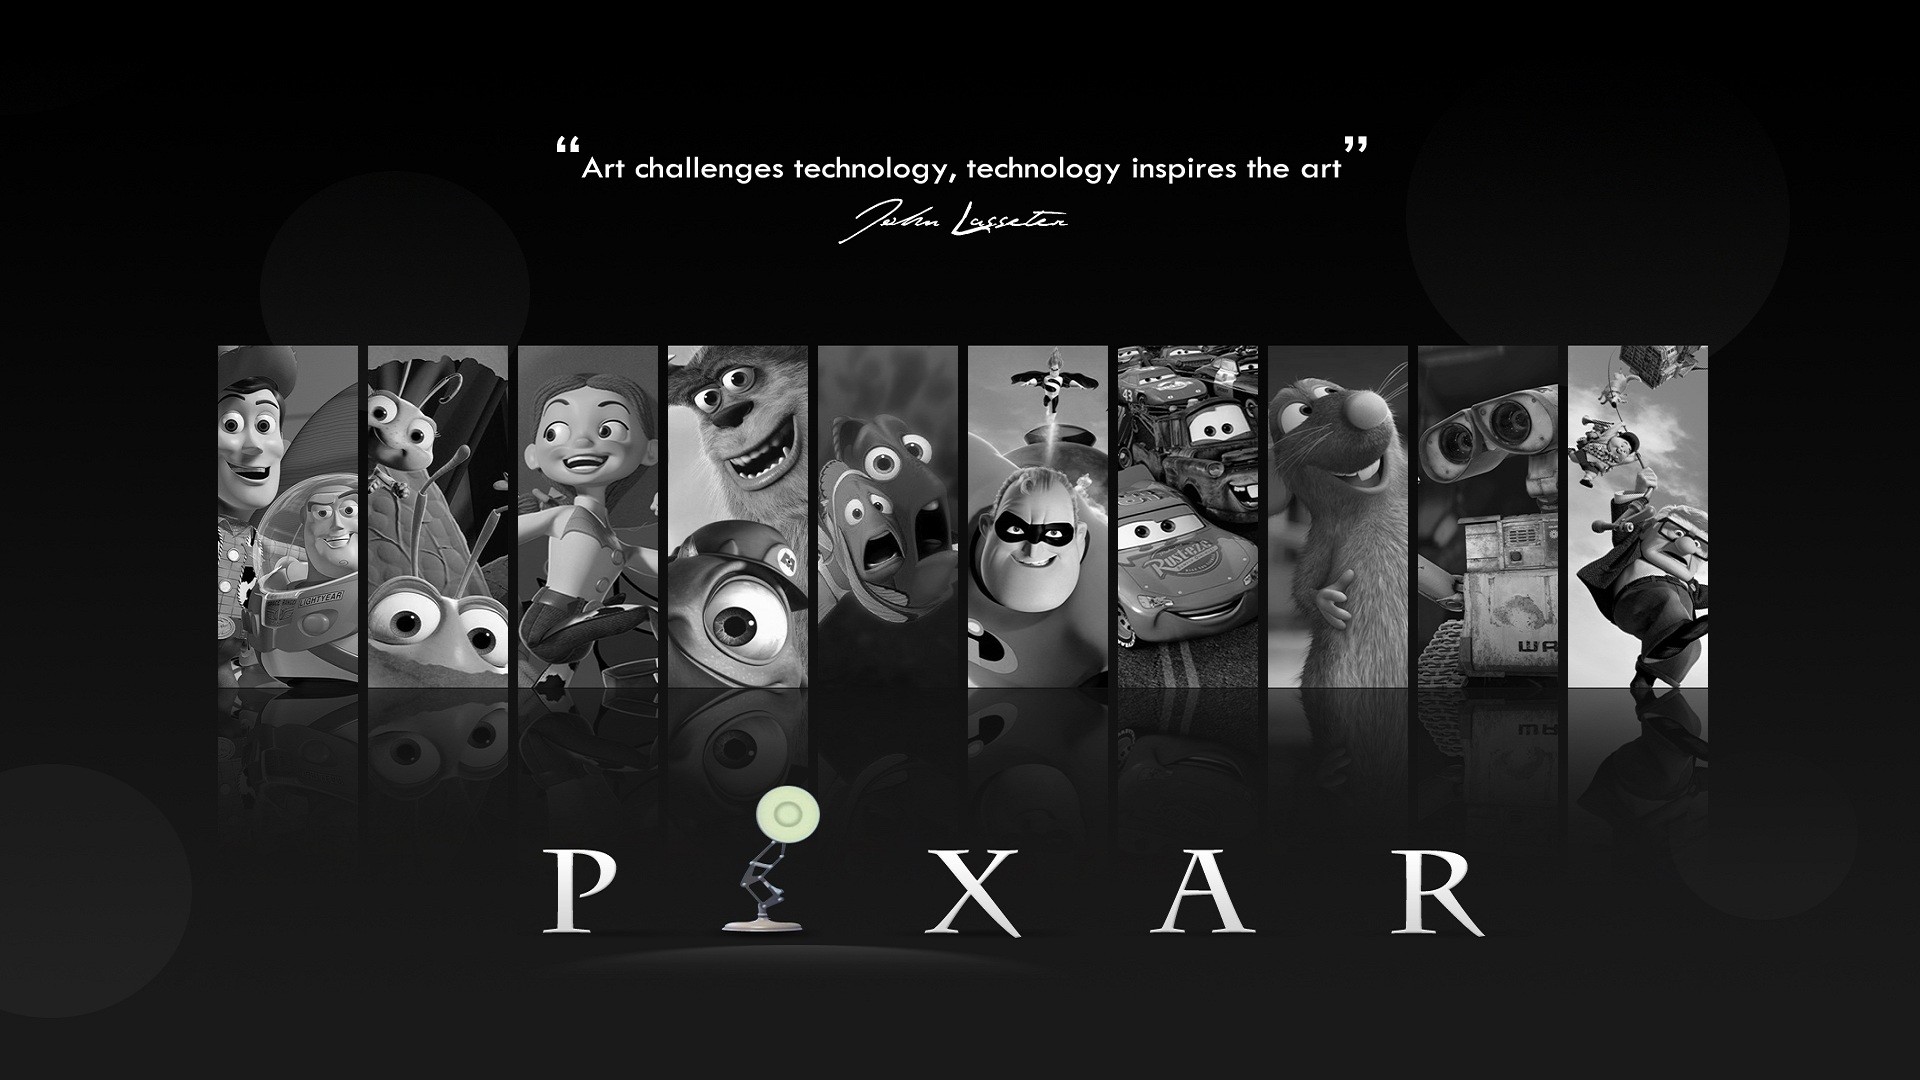 Movies Pixar Animation Studios Toy Story Monsters Inc Cars Movie WALL E 1920x1080